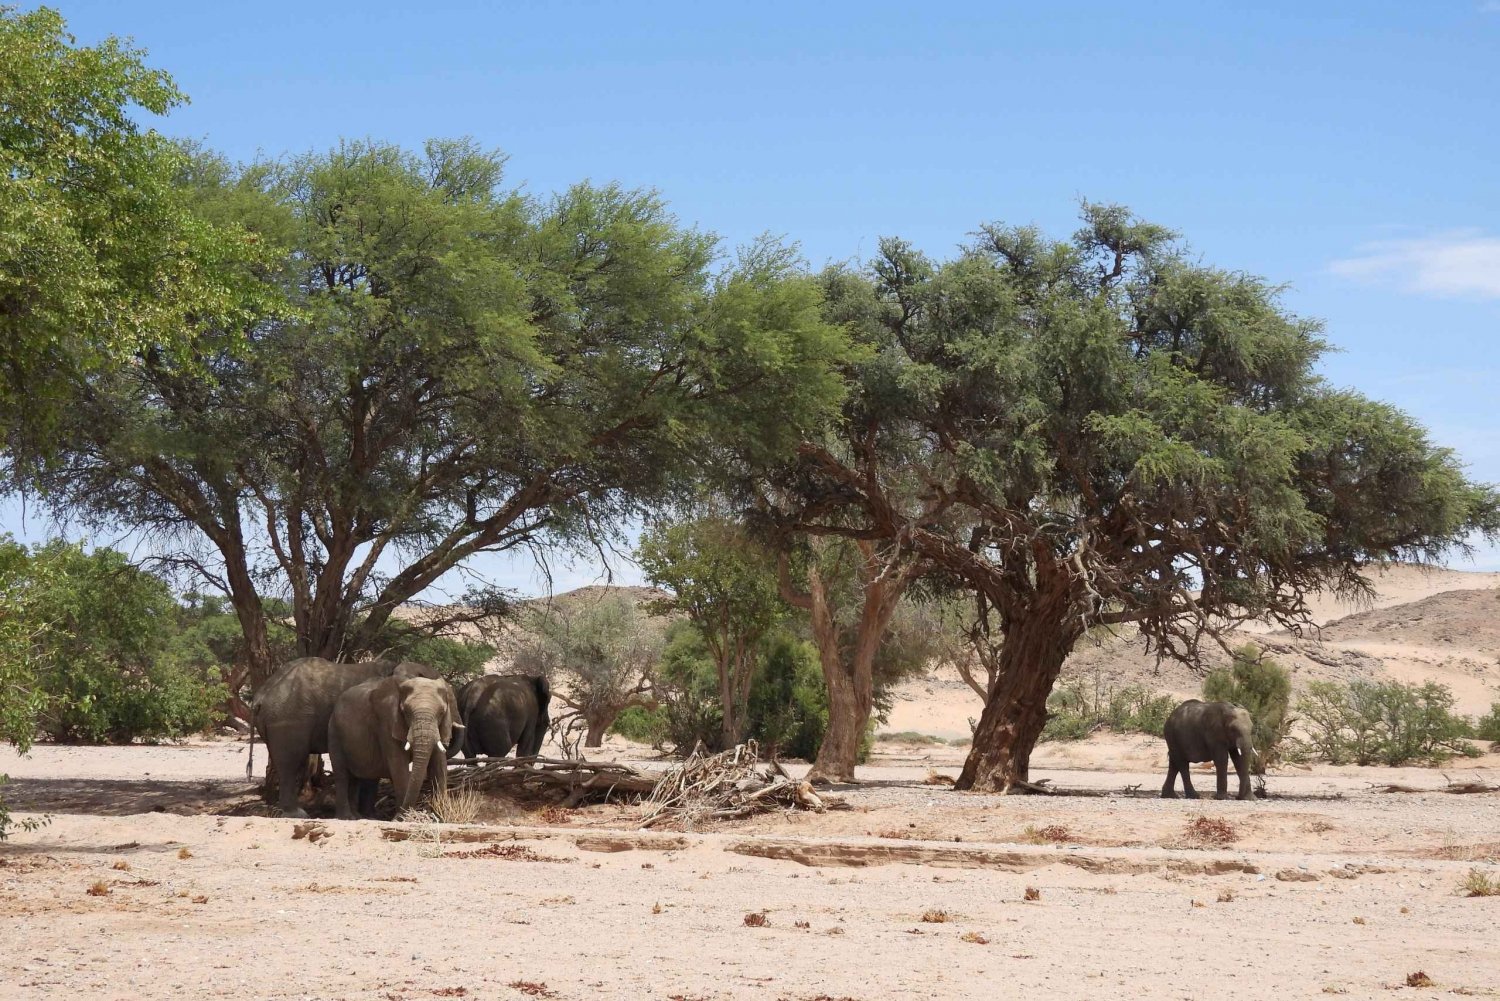 Elephant Adventure with Herson - a native of Damaraland